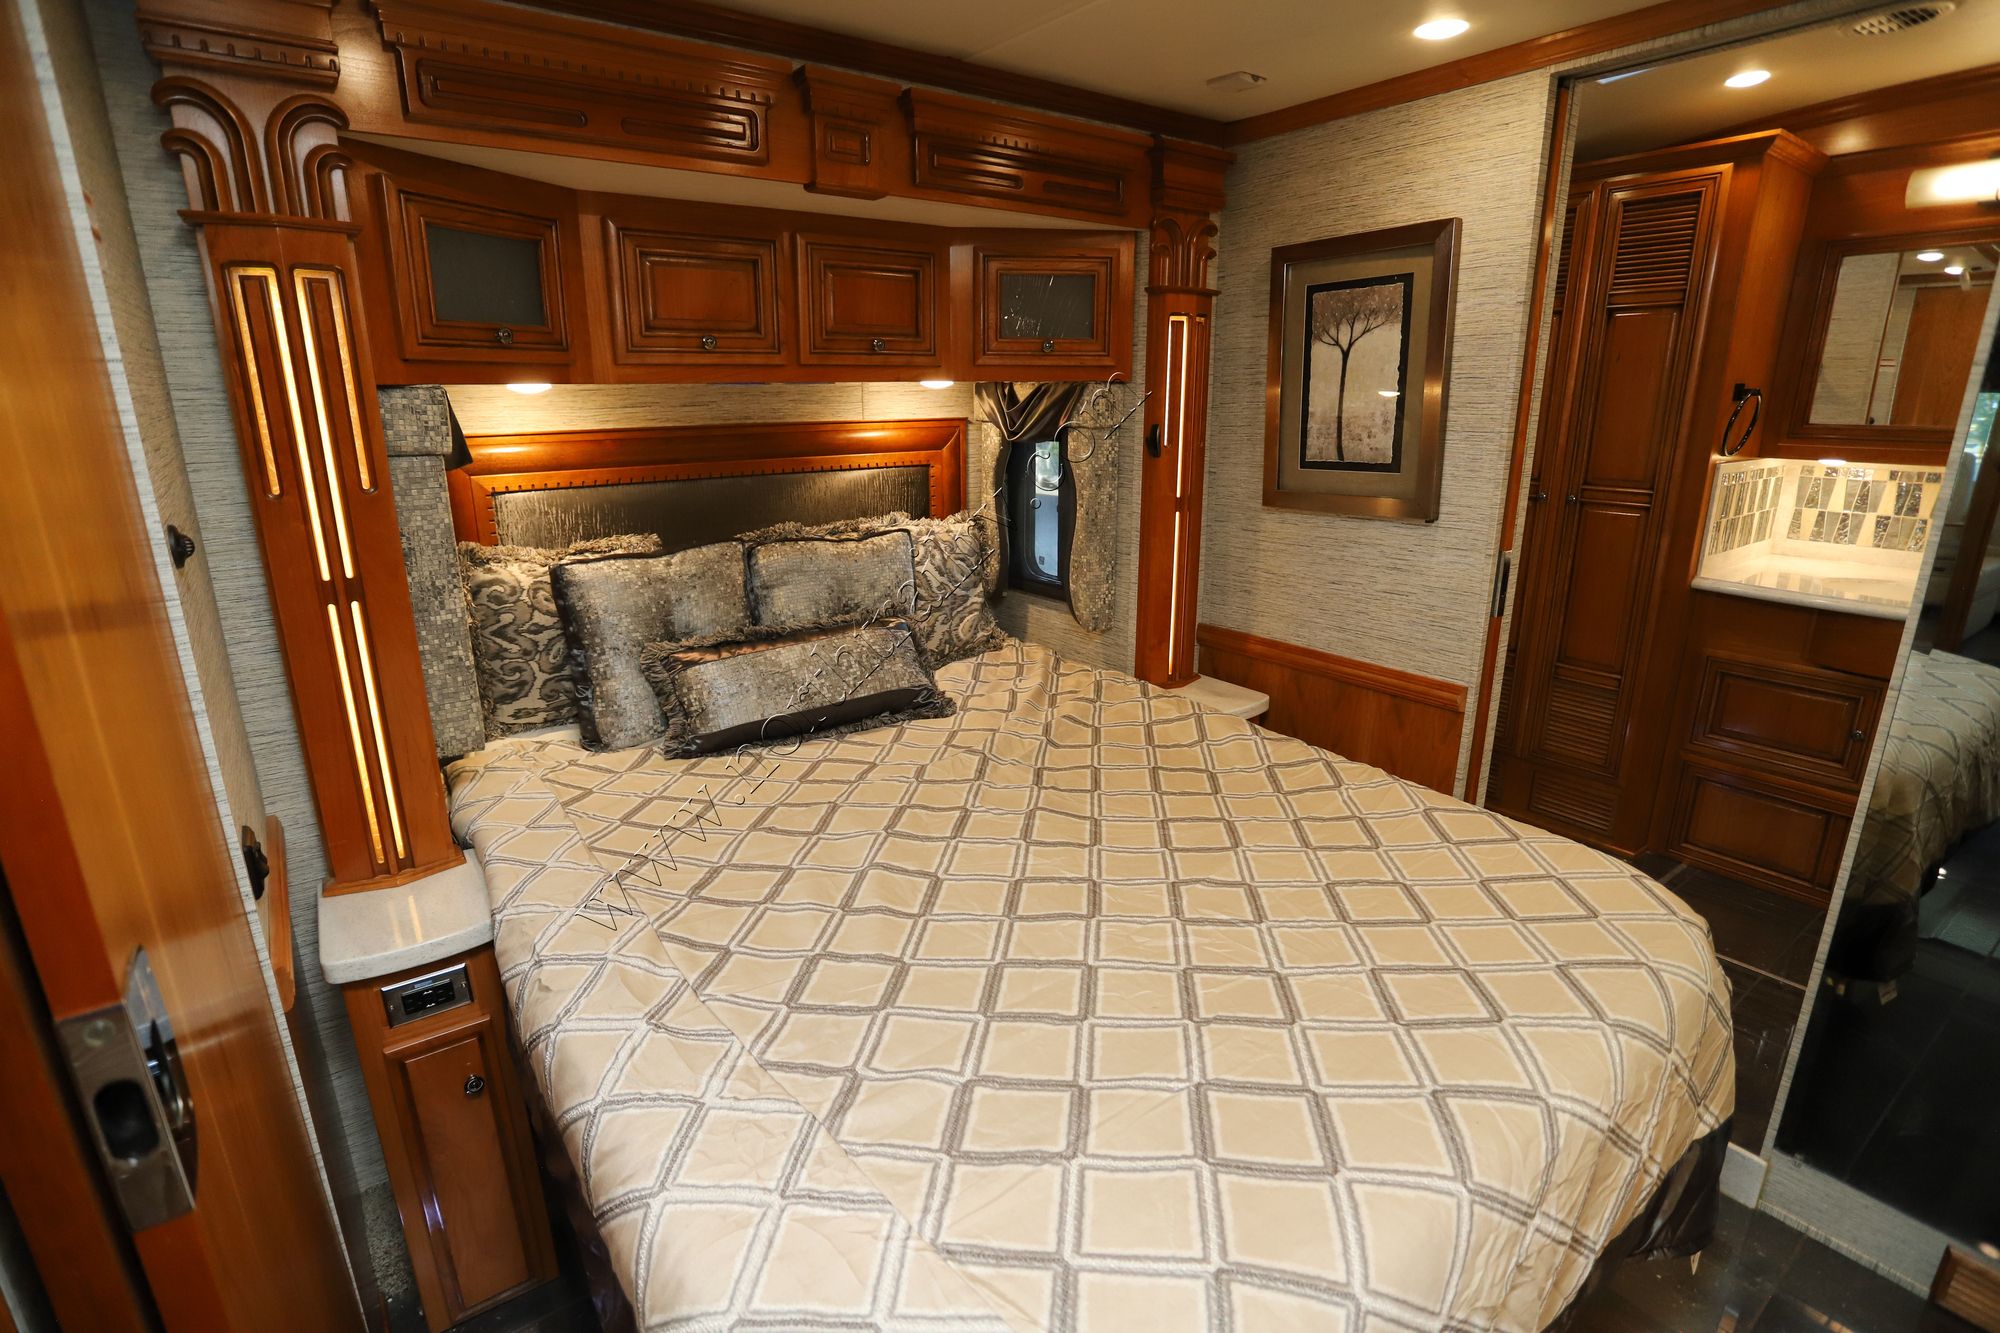 Used 2018 Newmar Dutch Star 3736 Class A  For Sale